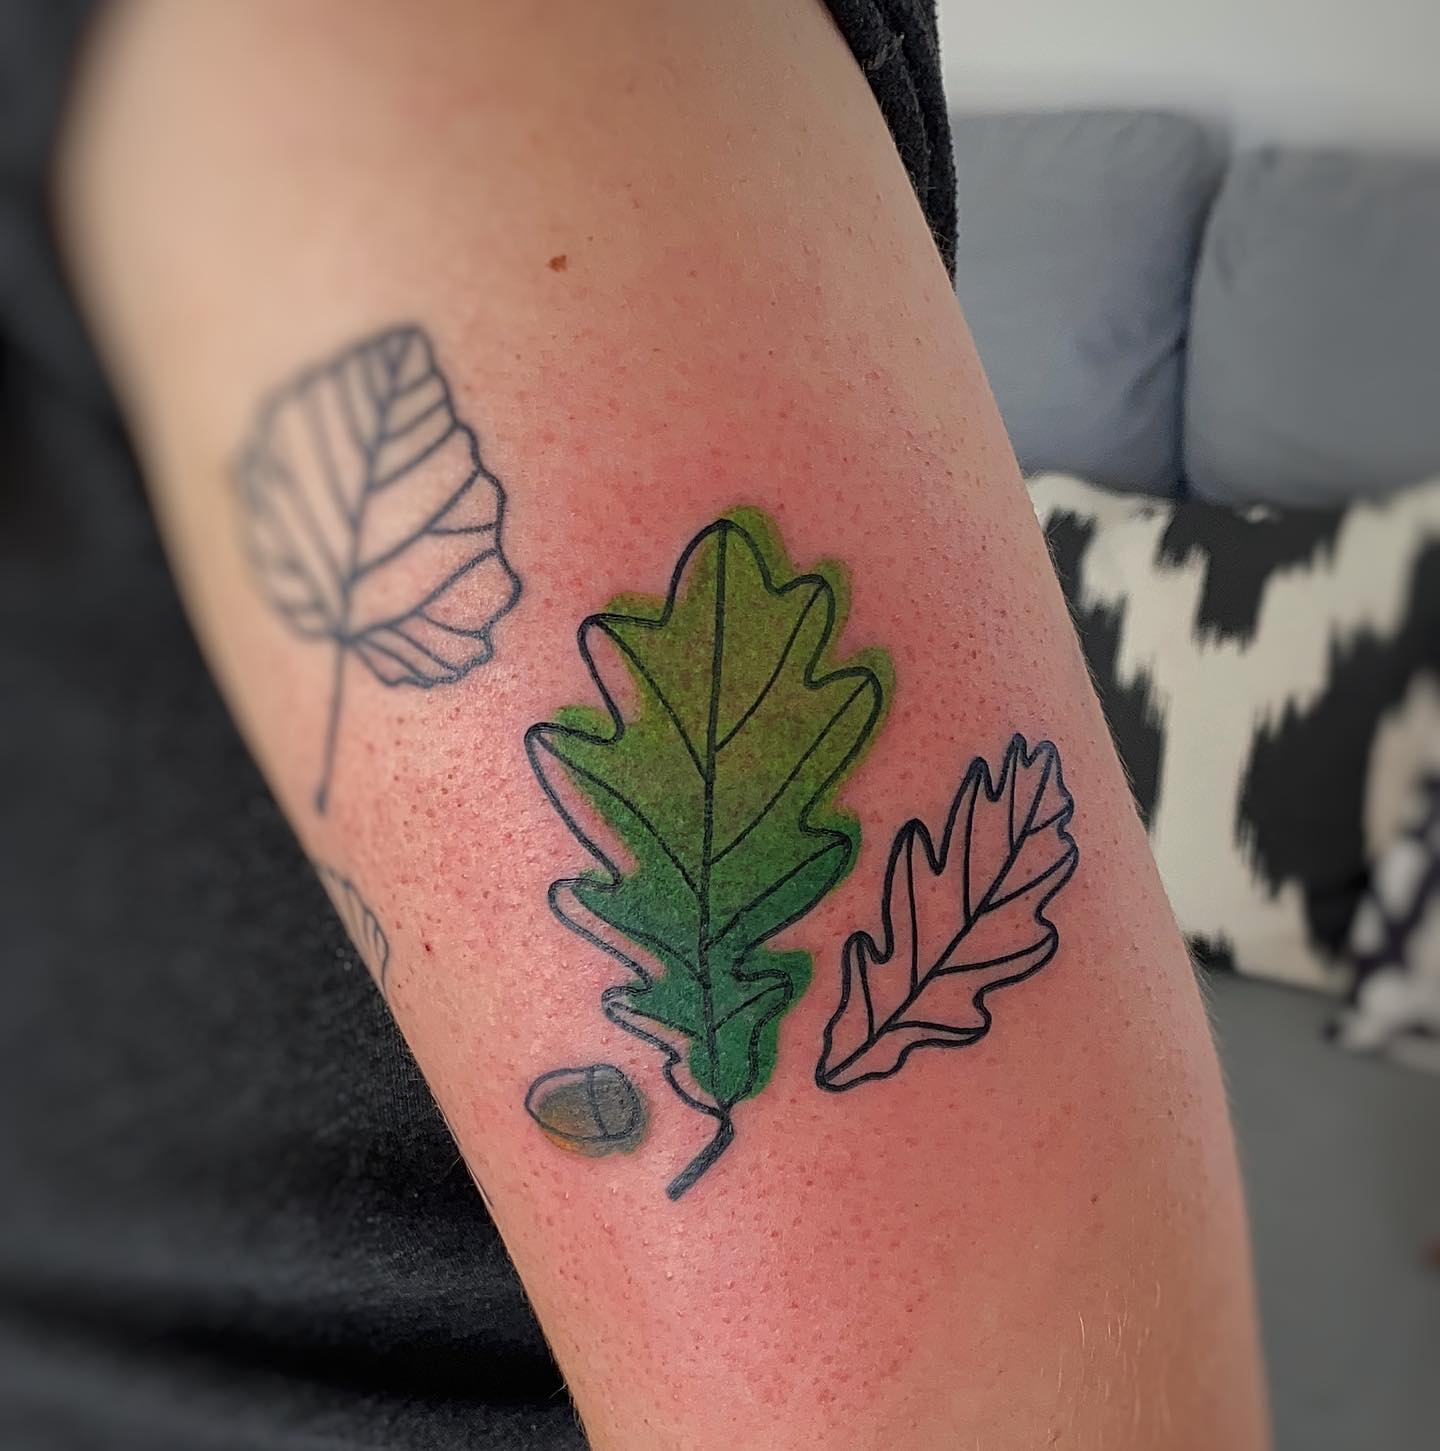 There are different types of leaves and it is hard to choose which one to get as a tattoo. In the design above, you can bring different tattoos together and look amazing!